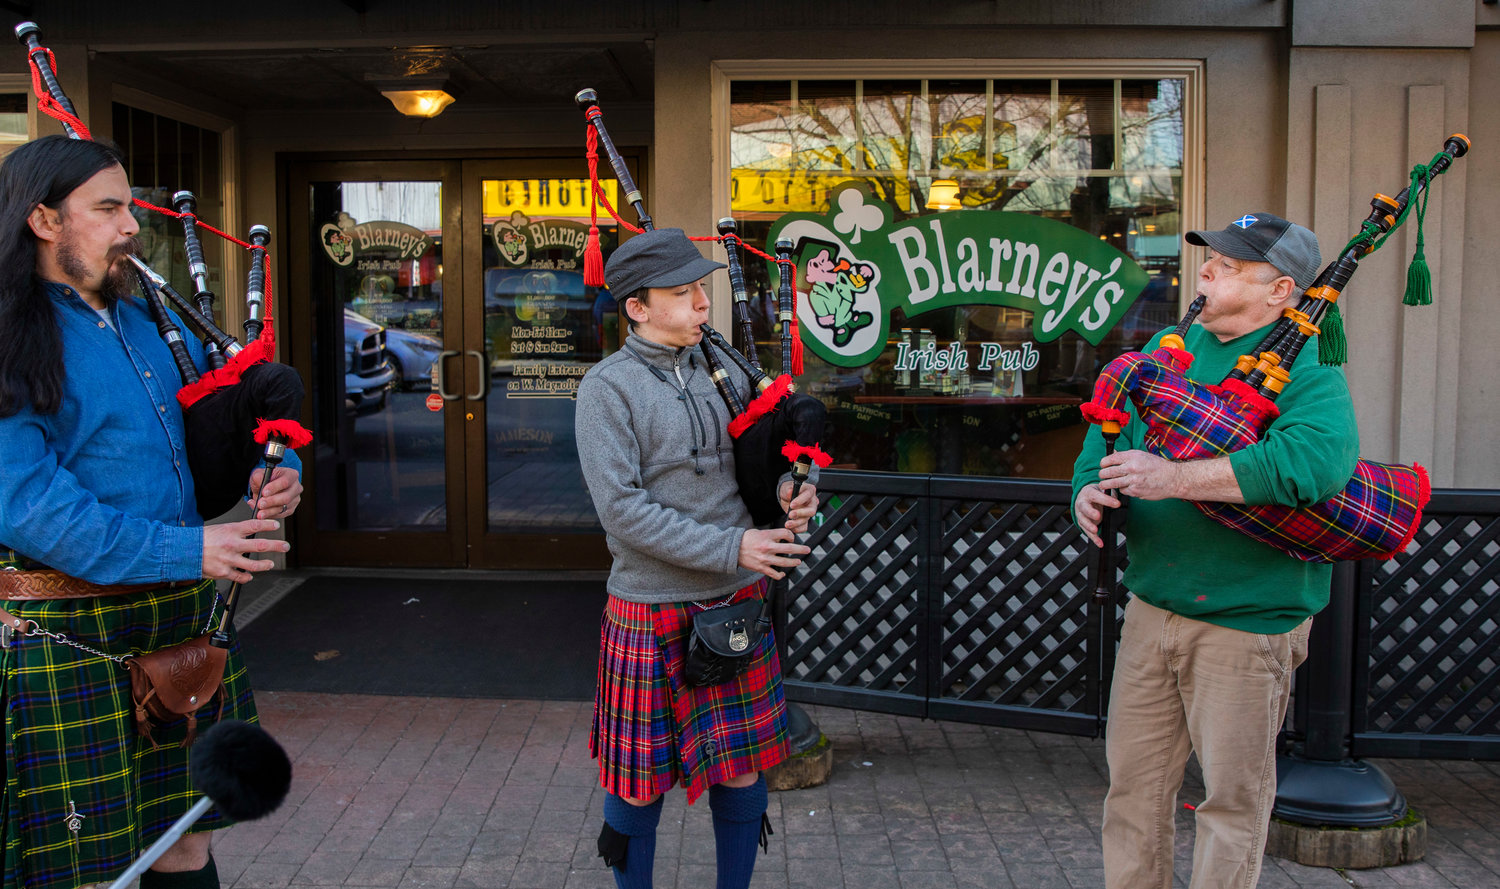 From left, bagpipers James Roush, Orion Hunter, and Mud Piper bring sounds of St. Patrick’s Day to downtown Centralia outside O’Blarney’s Irish Pub on Thursday.